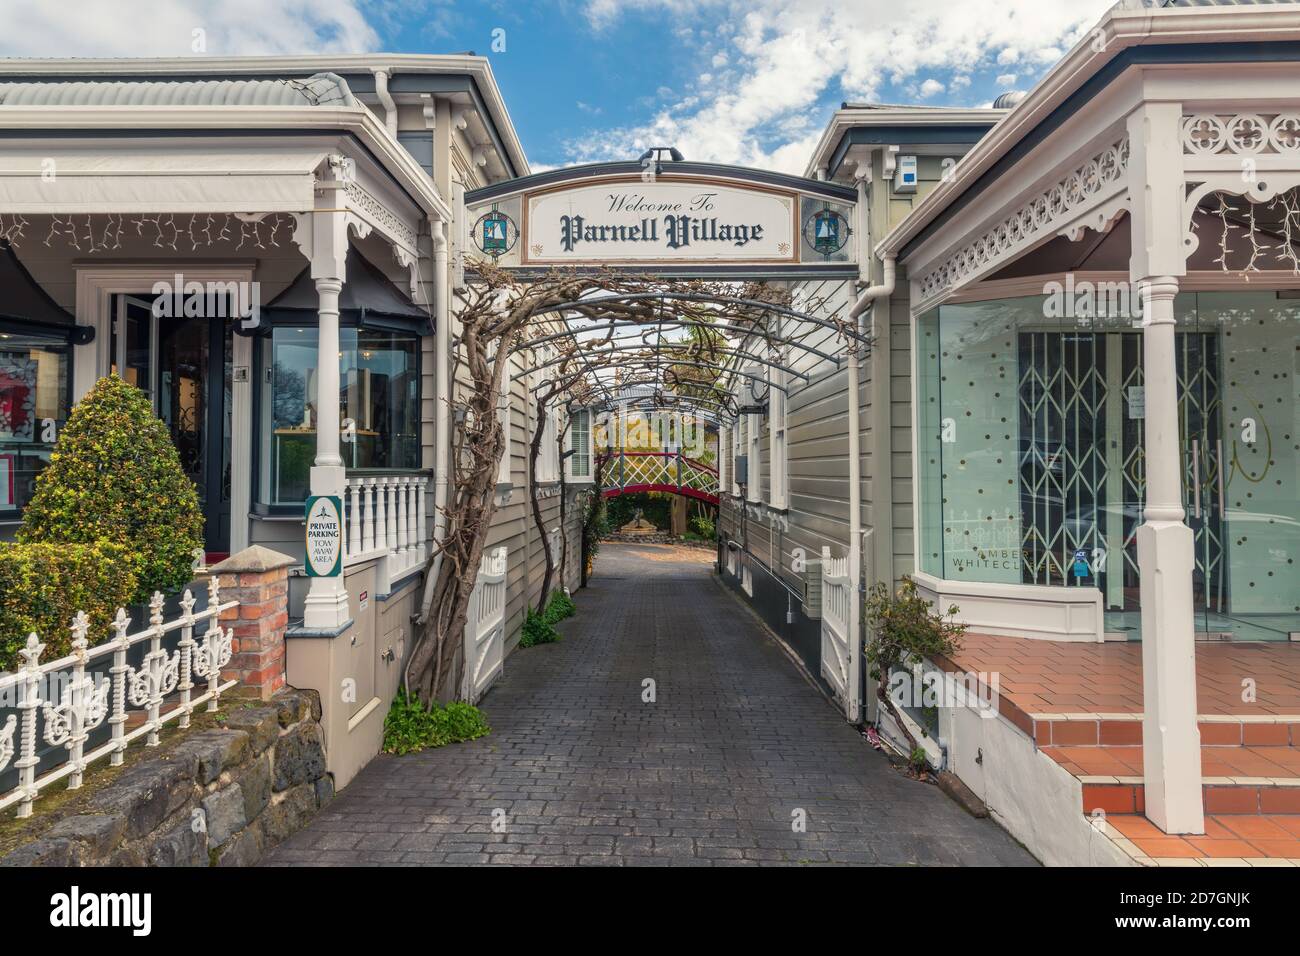 AUCKLAND, NEW ZEALAND - Sep 14, 2019: Auckland / New Zealand - September 14 2019: View of Parnell Village entrance Stock Photo